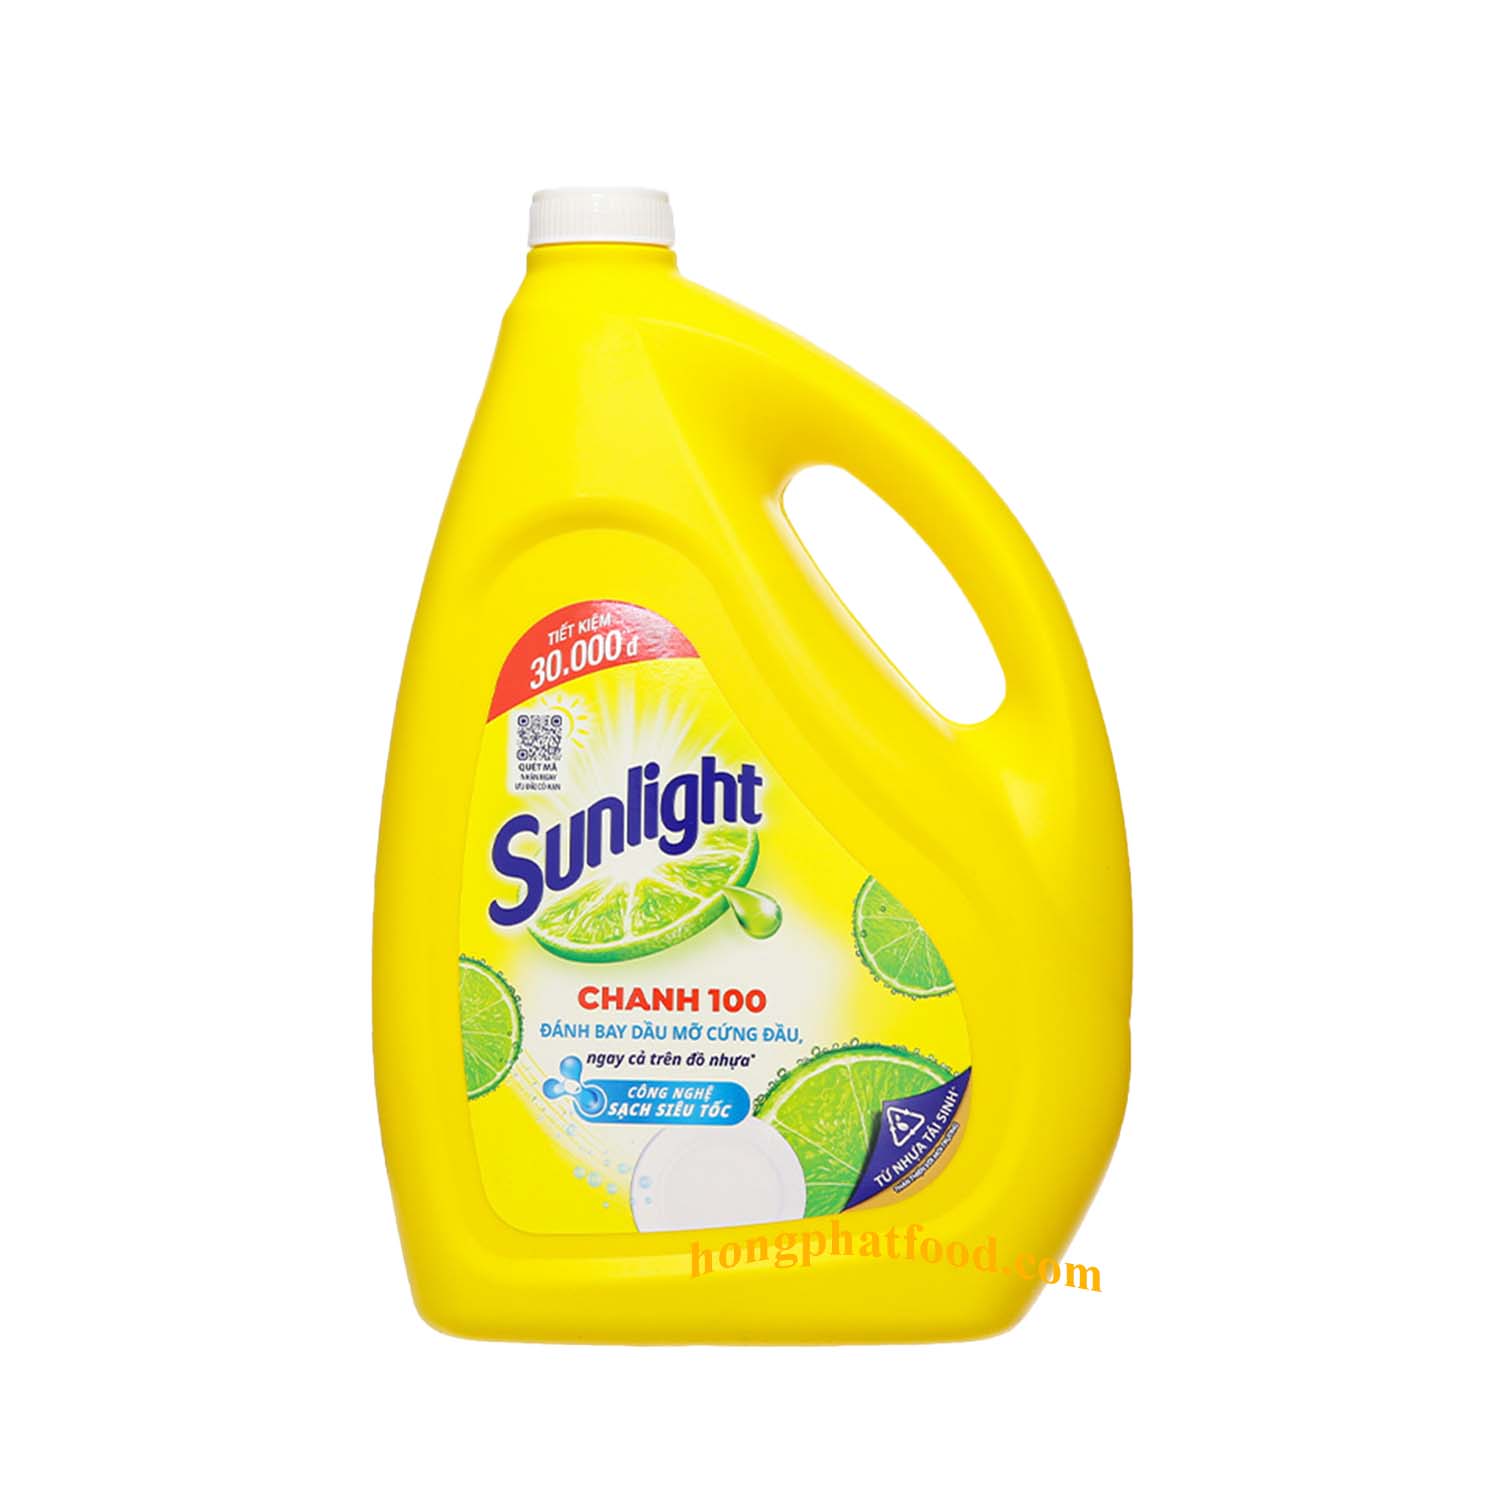 Sunlight Dish Soap reviews in Kitchen Cleaning Products - ChickAdvisor  (page 6)